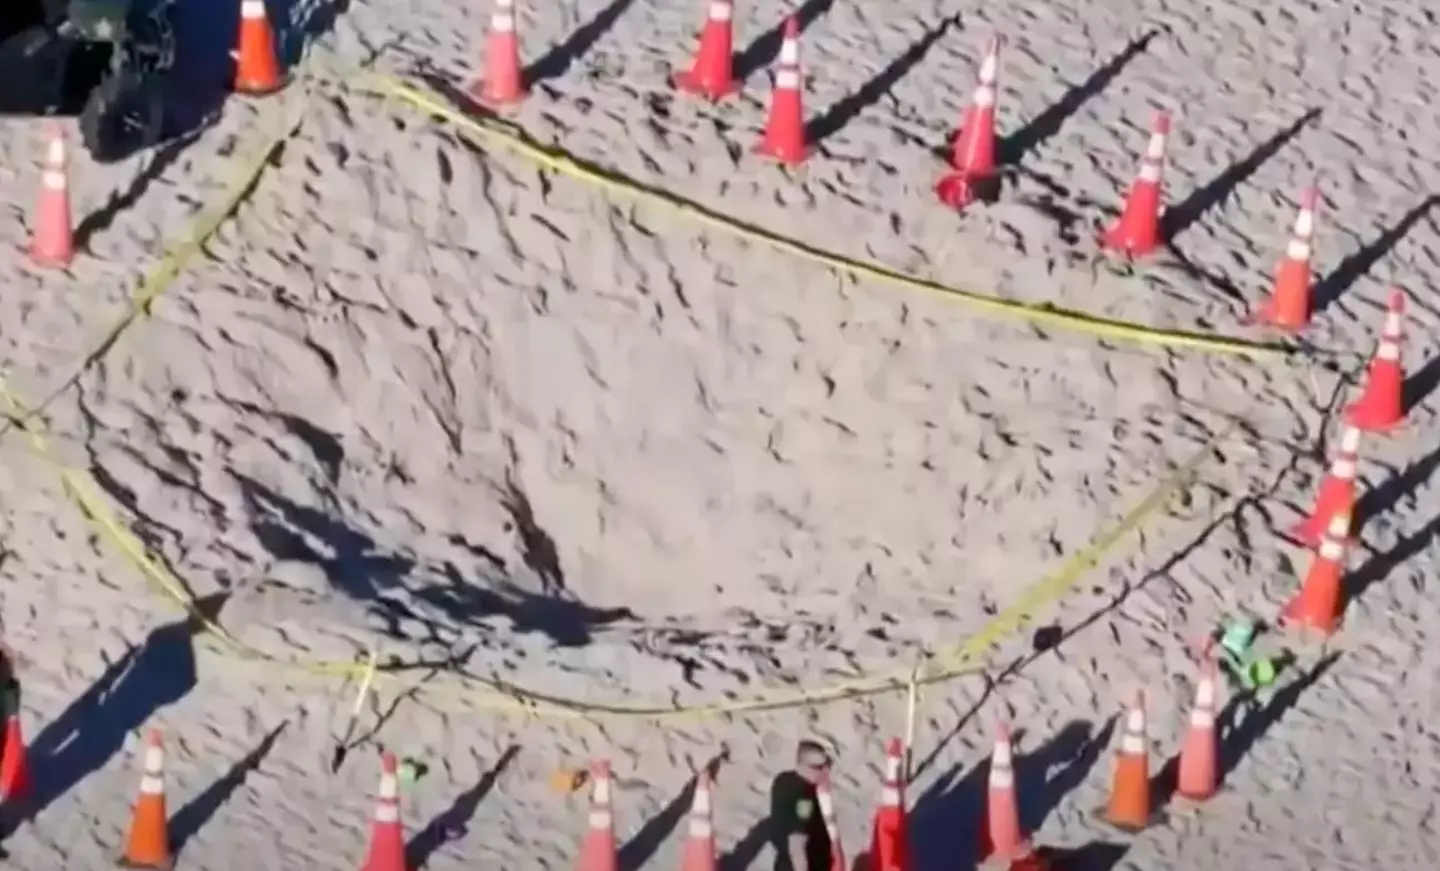 The children reportedly dug a hole measuring about five to six feet deep.